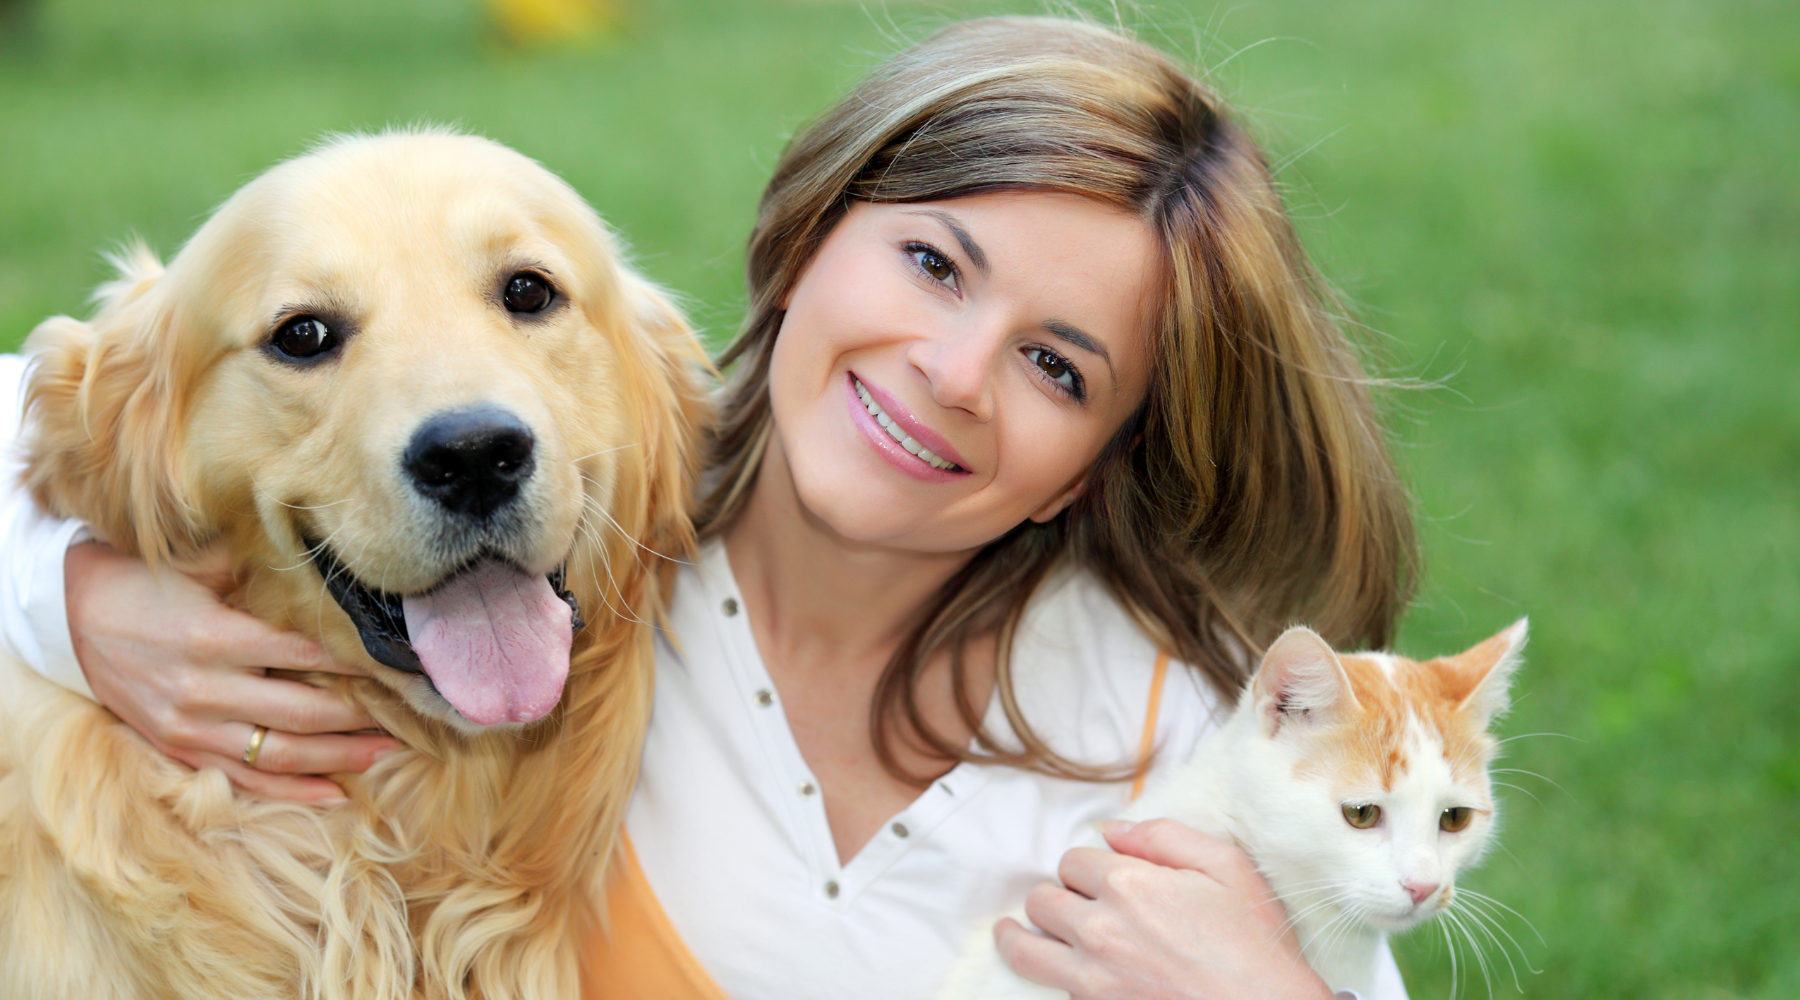 Lady smiling while holding her cat and dog